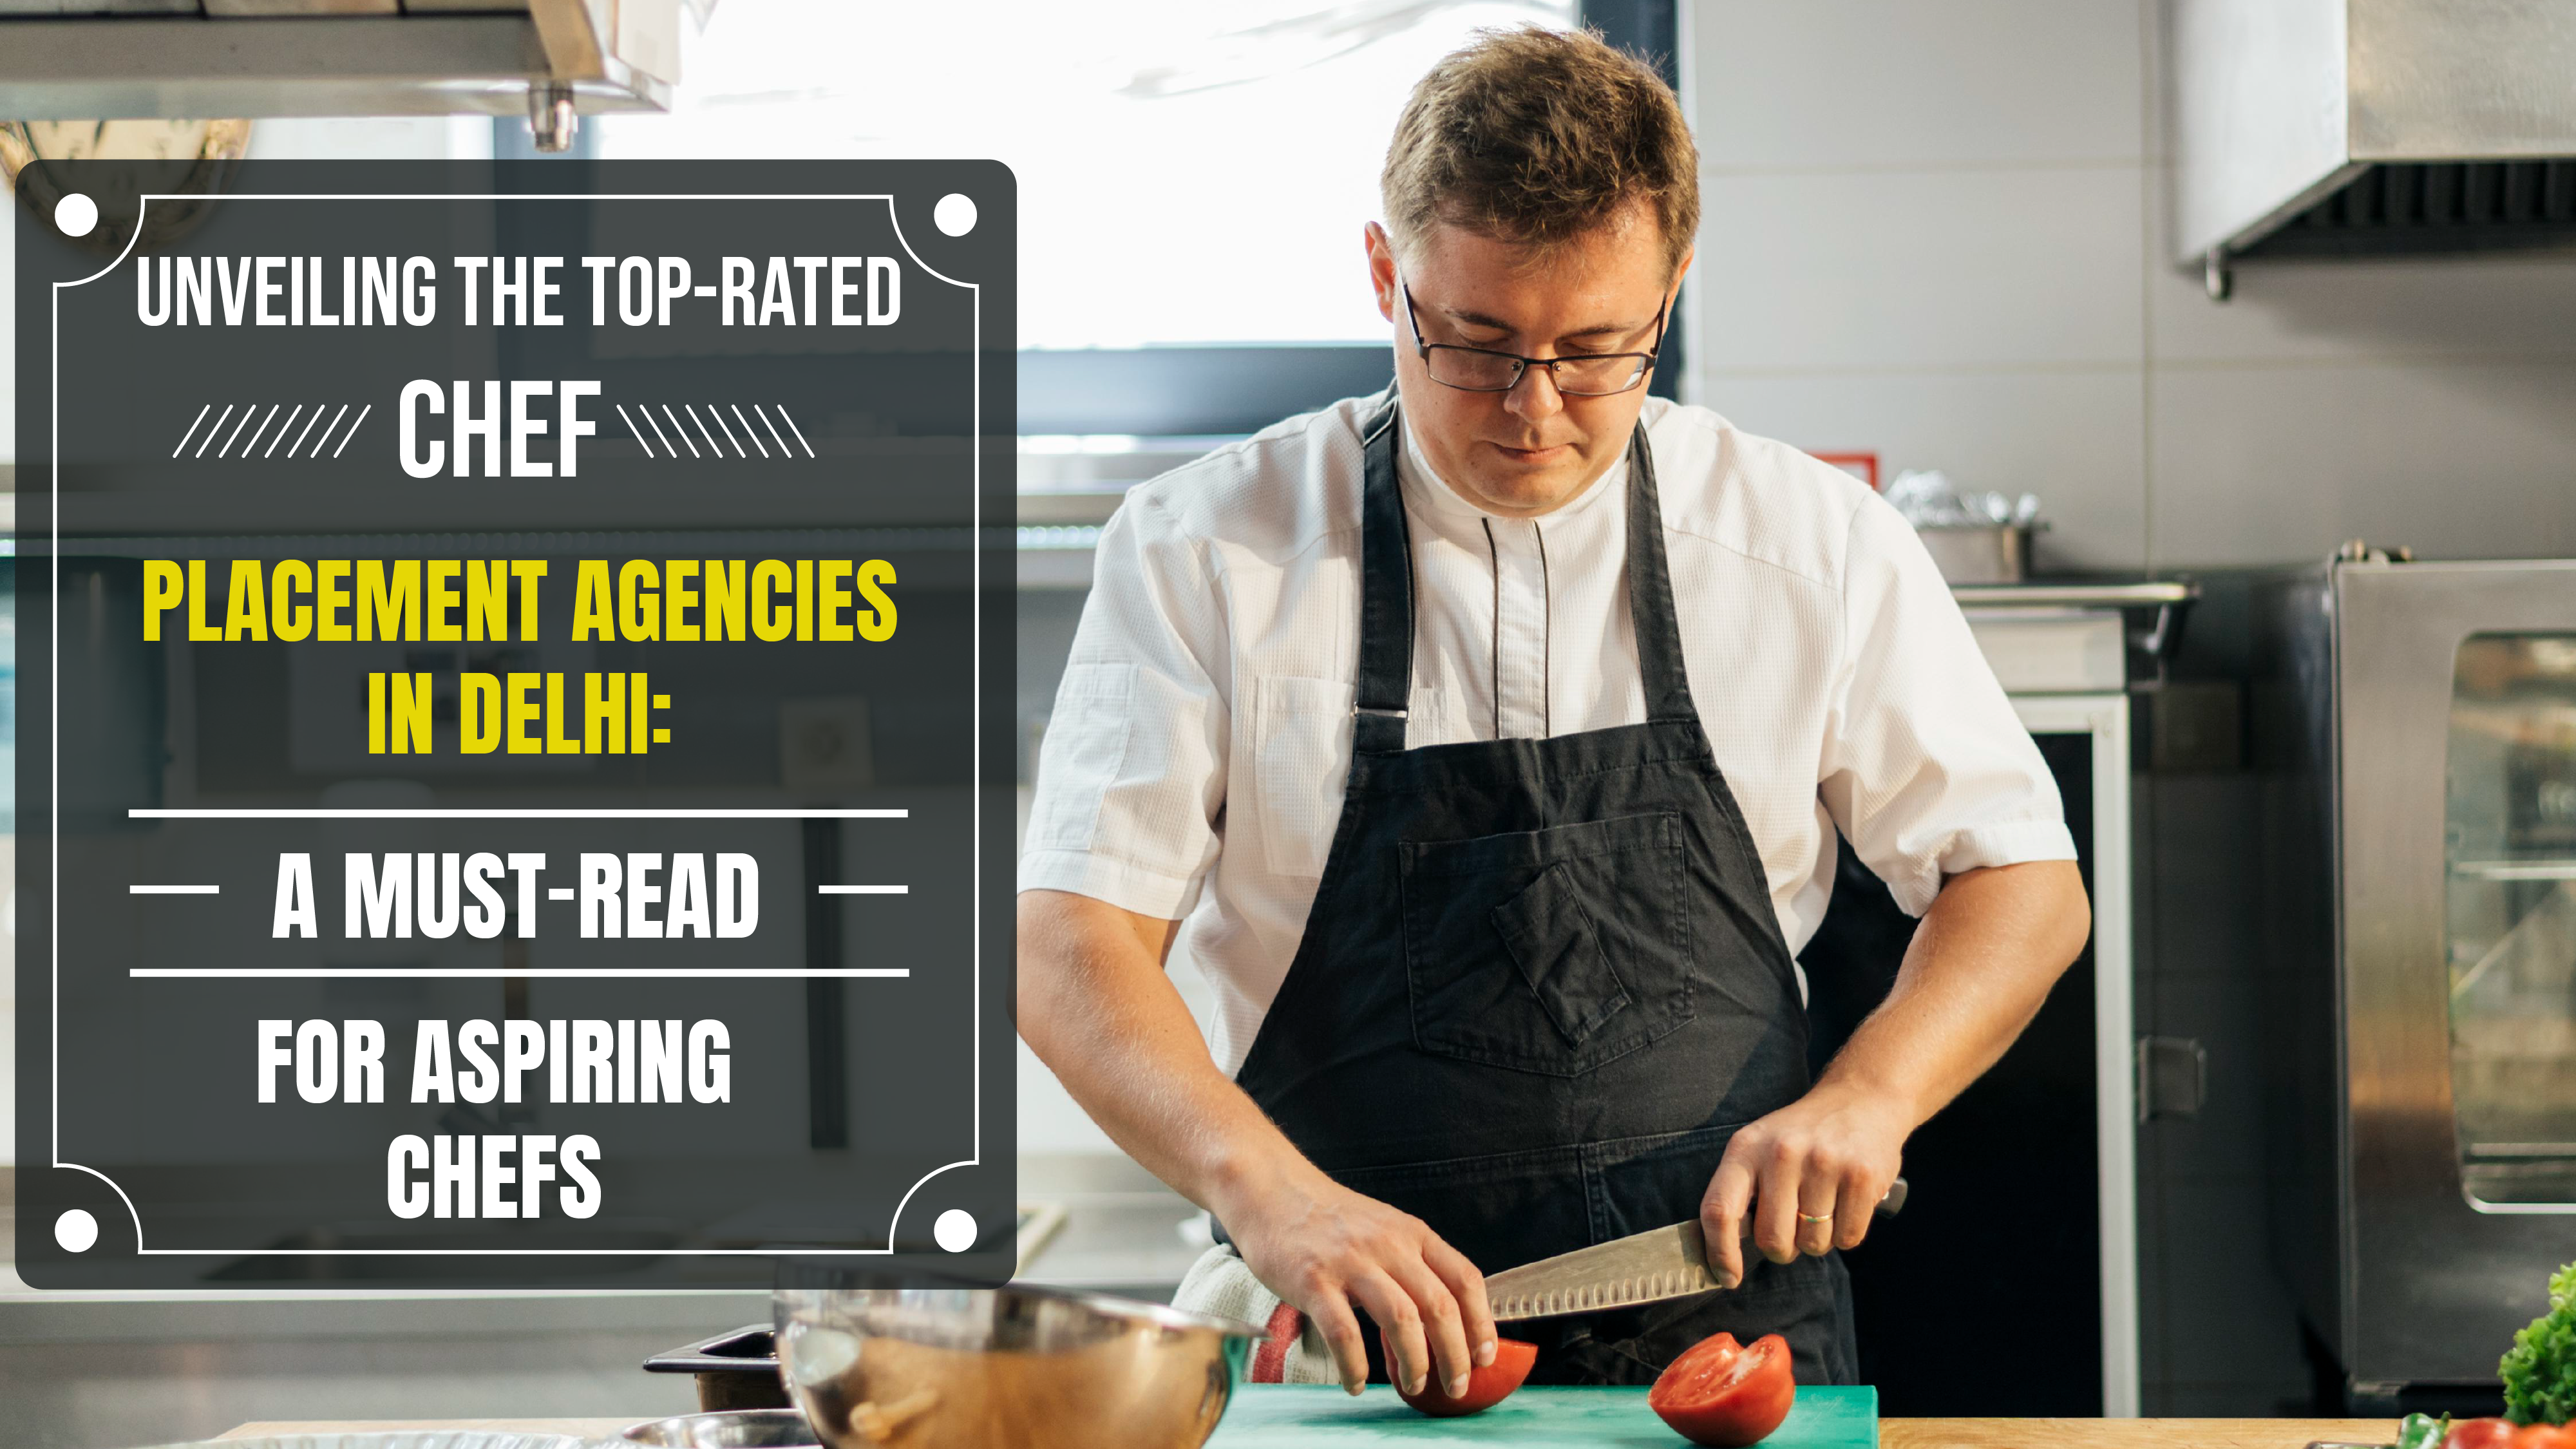 Unveiling the Top-Rated Chef Placement Agencies in Delhi: A Must-Read for Aspiring Chefs